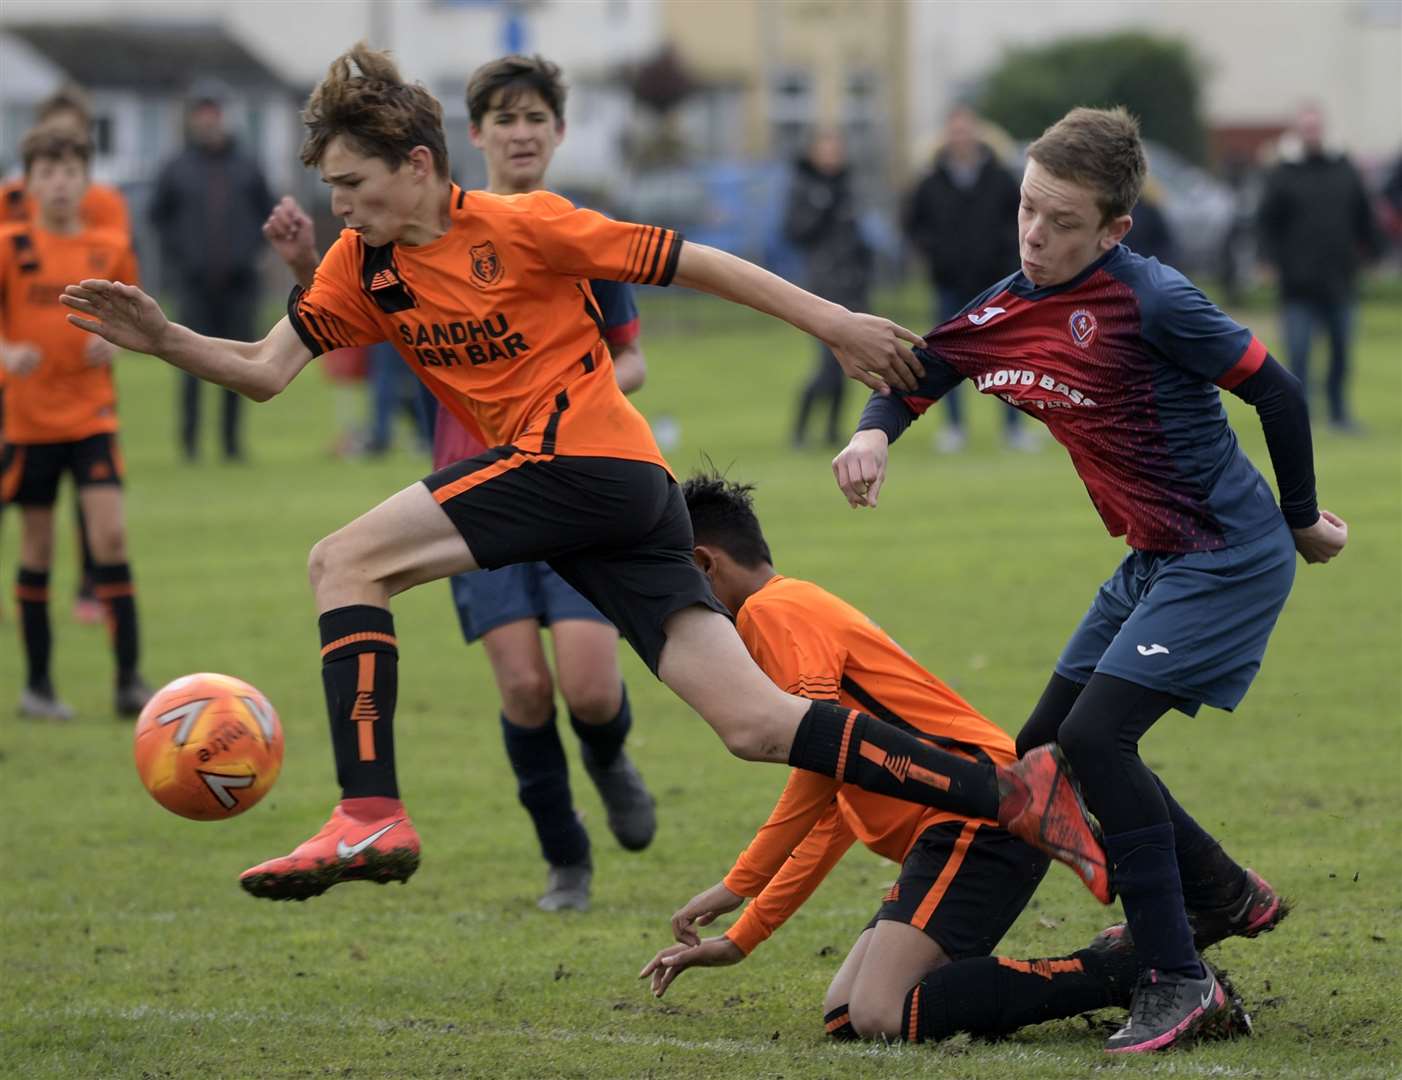 New Road Blues under-14s (orange) lead the charge against Hempstead Valley under-14s. Picture: Barry Goodwin (42745147)